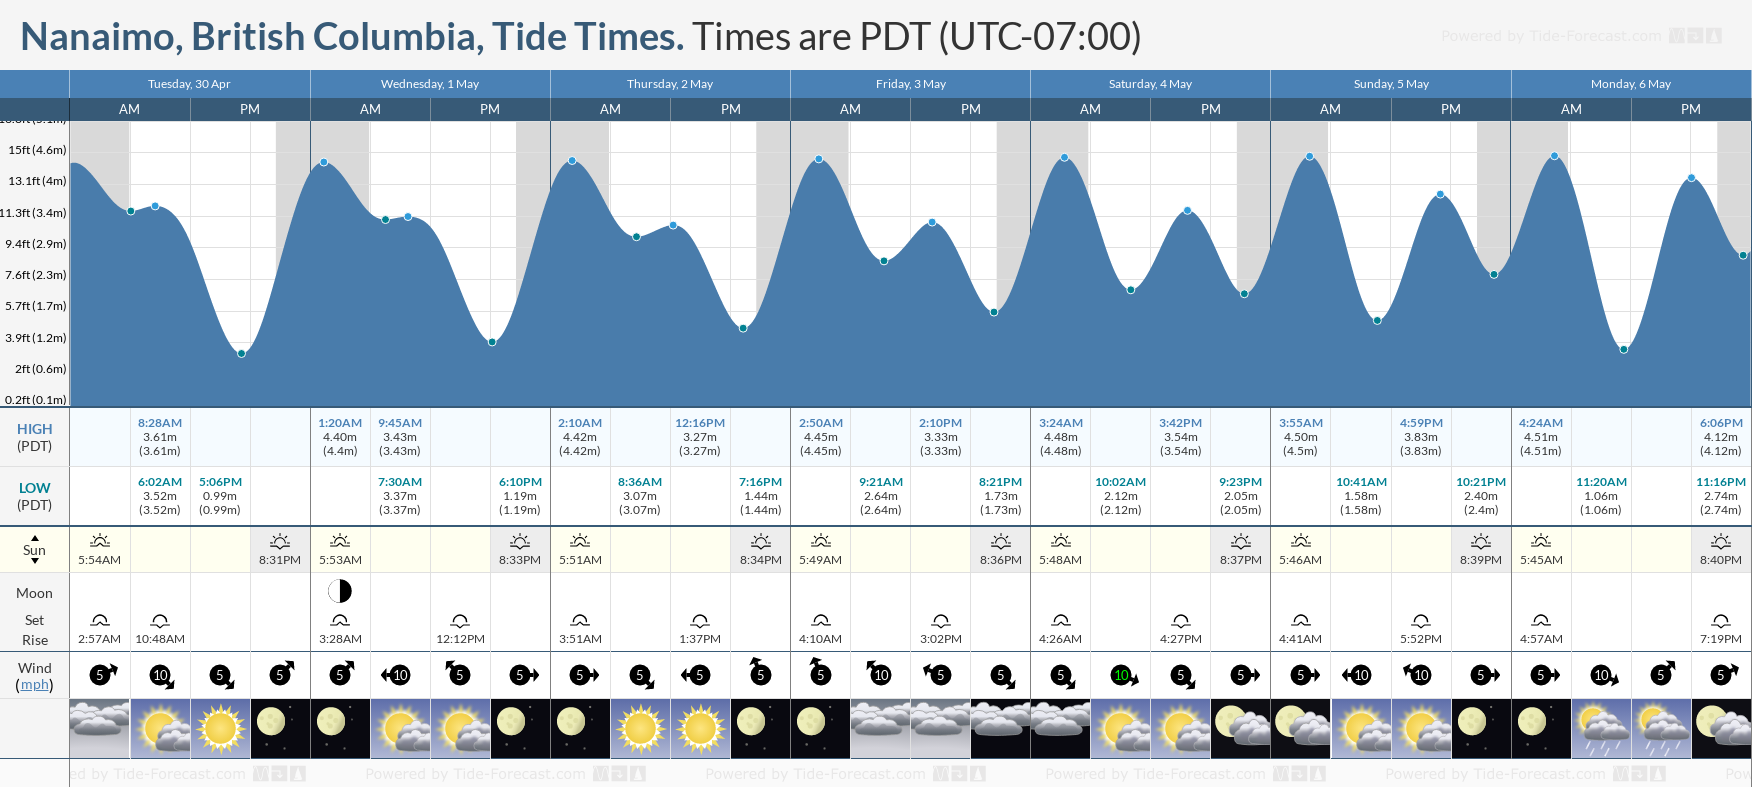 Nanaimo, British Columbia Tide Chart including high and low tide tide times for the next 7 days